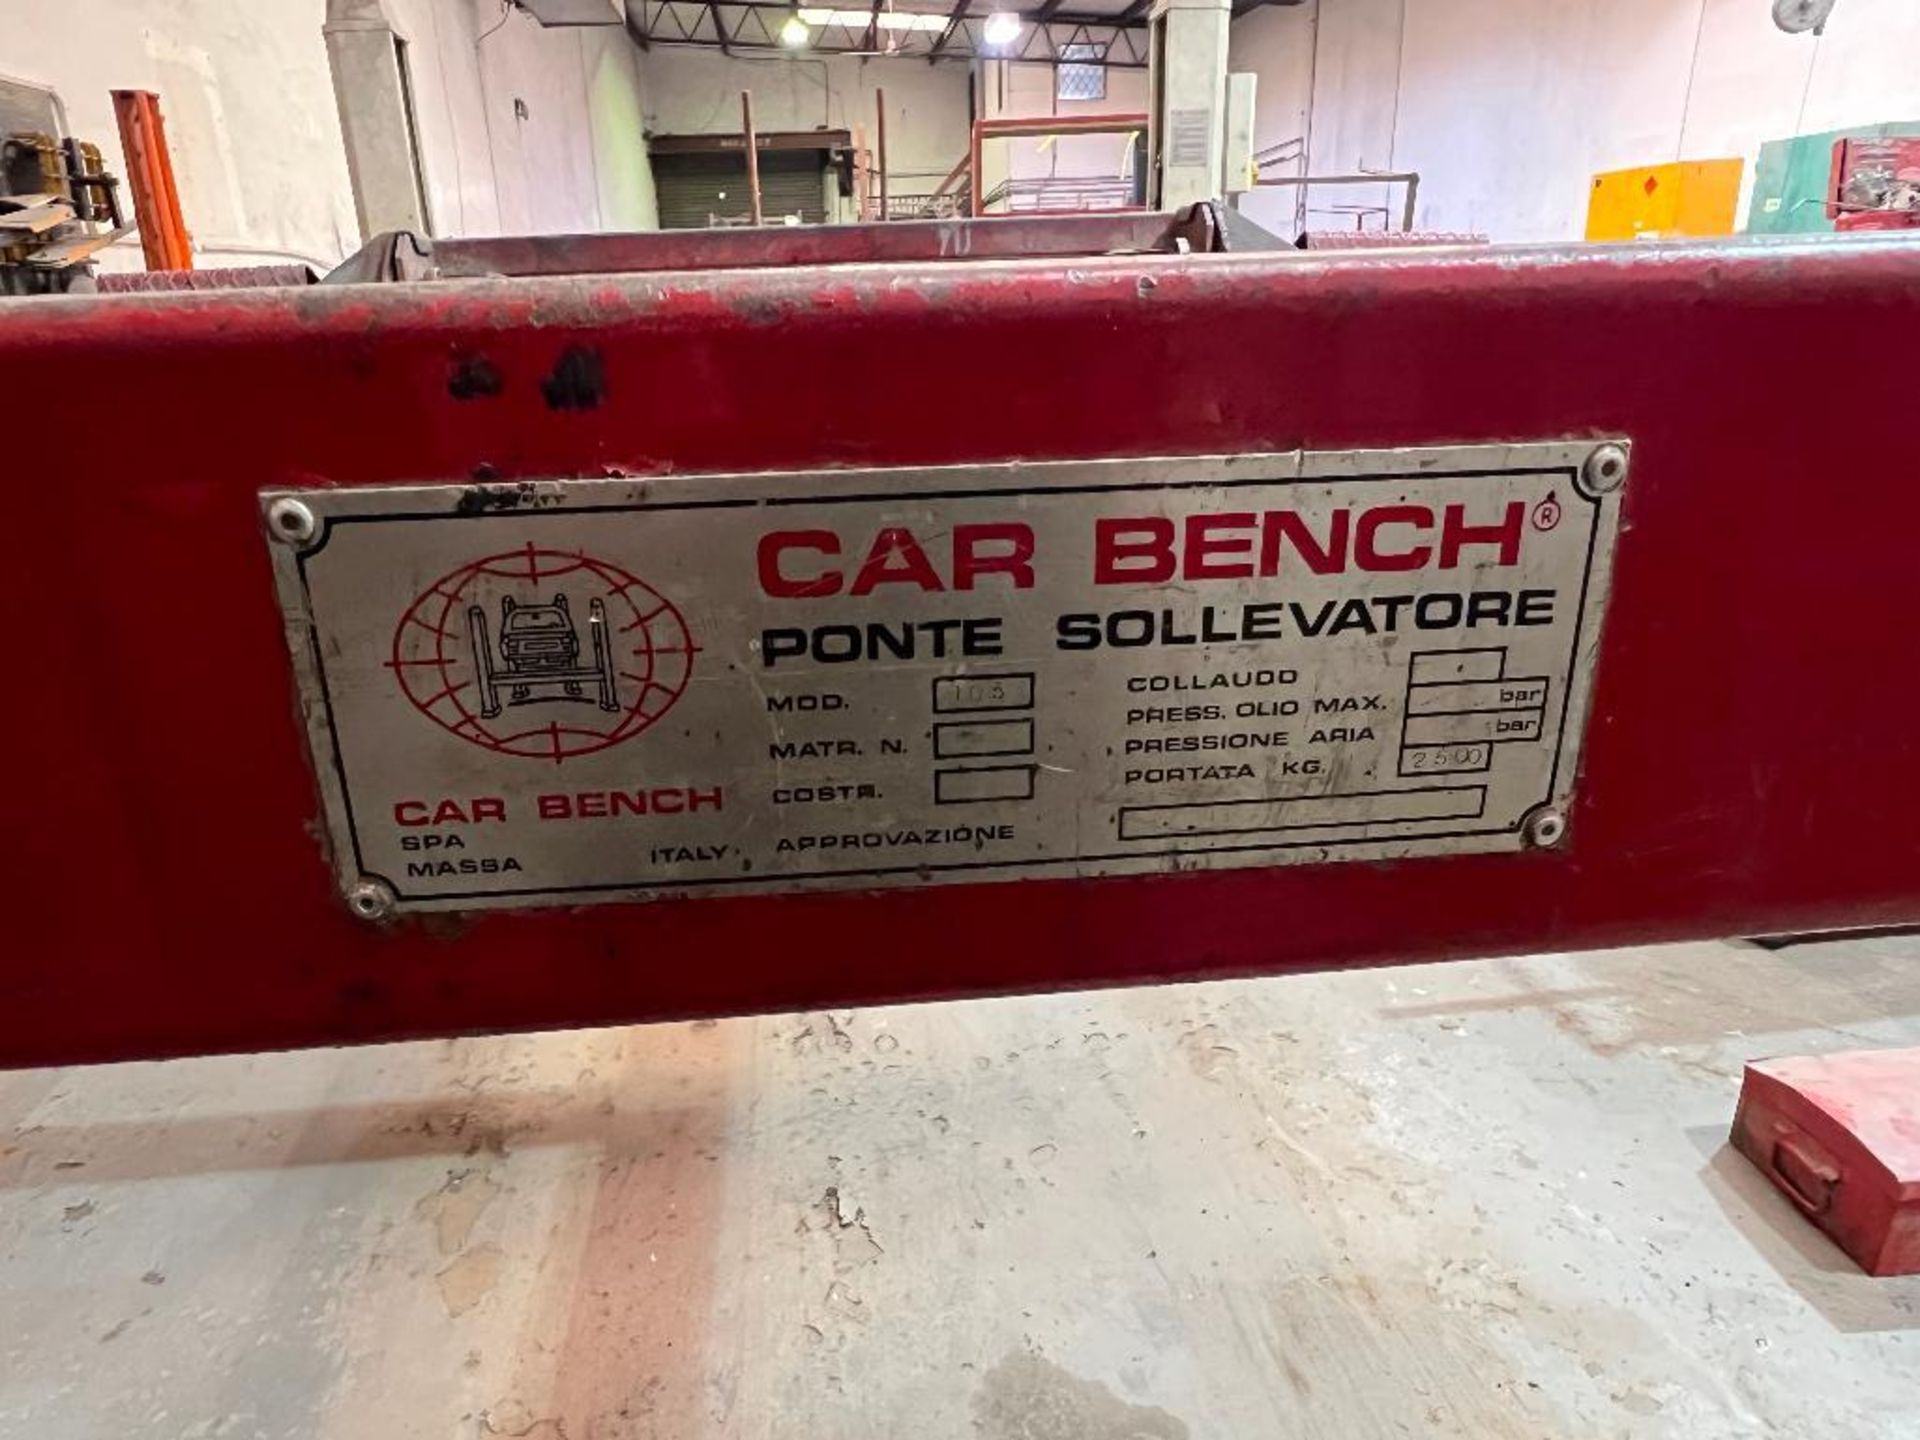 Car Bench Ponte Sollevatore 2.5 Tonne 4 Post Hydraulic Vehicle Lift System for Body Work Repairs, in - Image 21 of 22